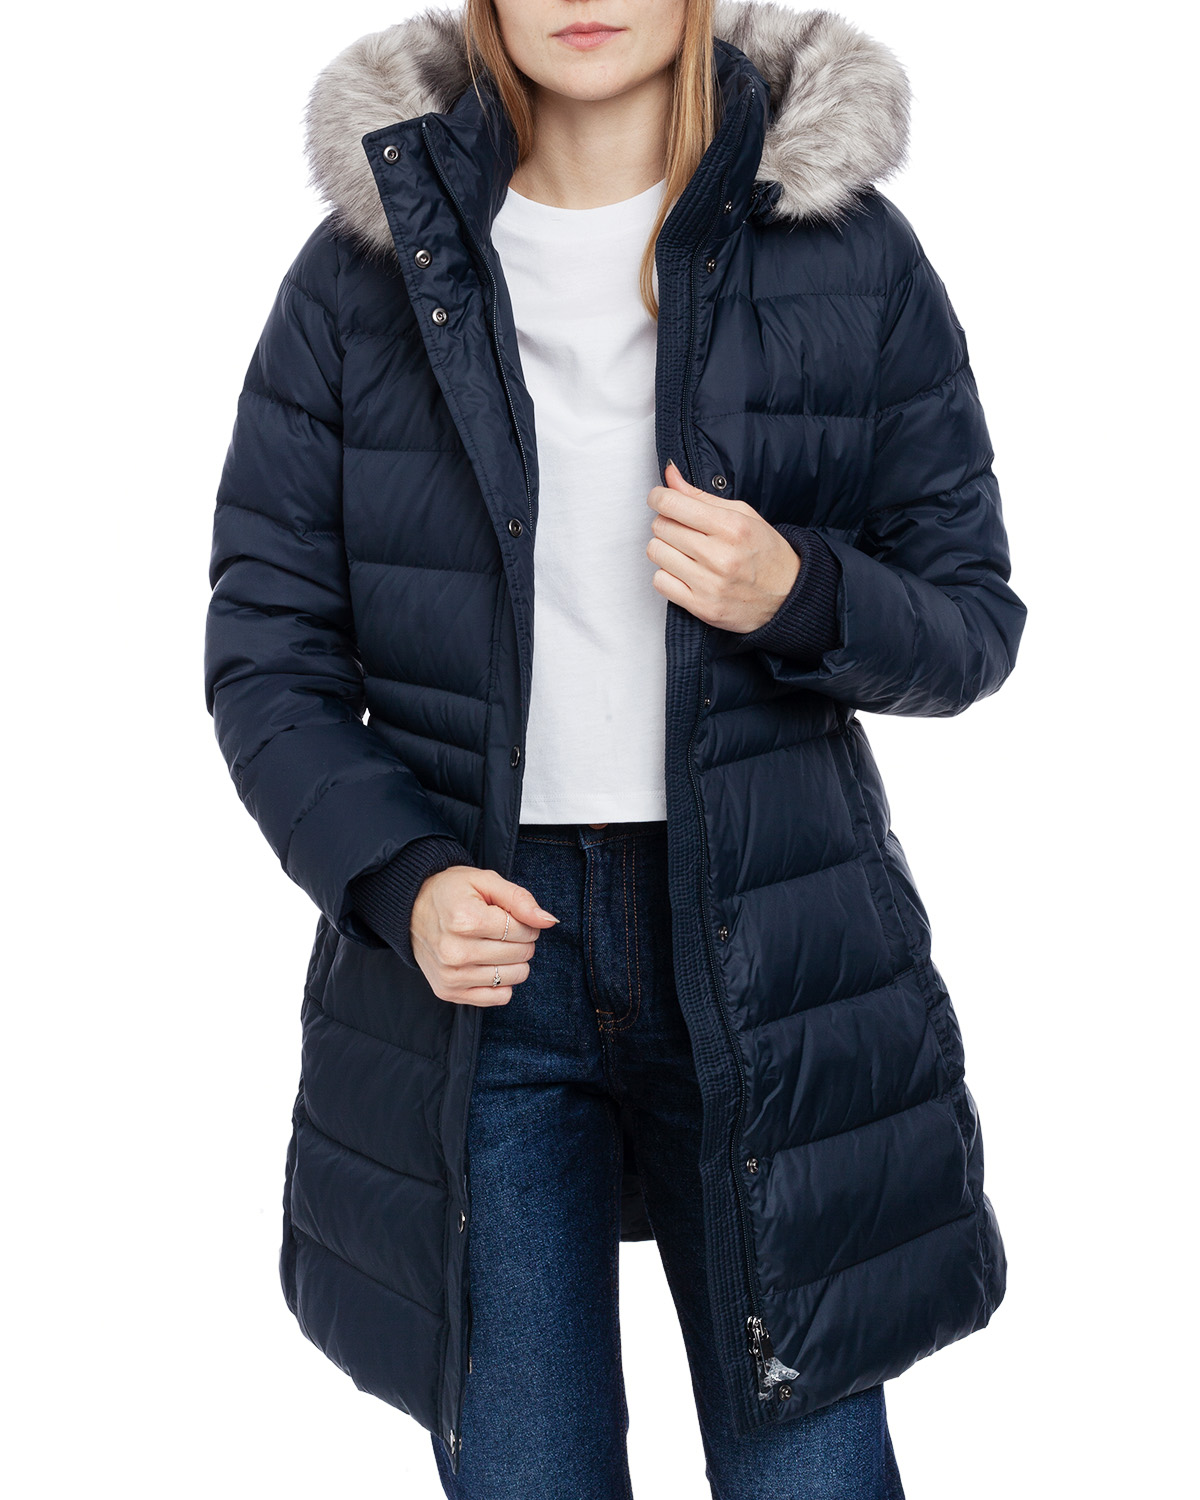 Colleague Offense sad Tommy Hilfiger New Tyra Down Coat Best Sale, SAVE 53%.